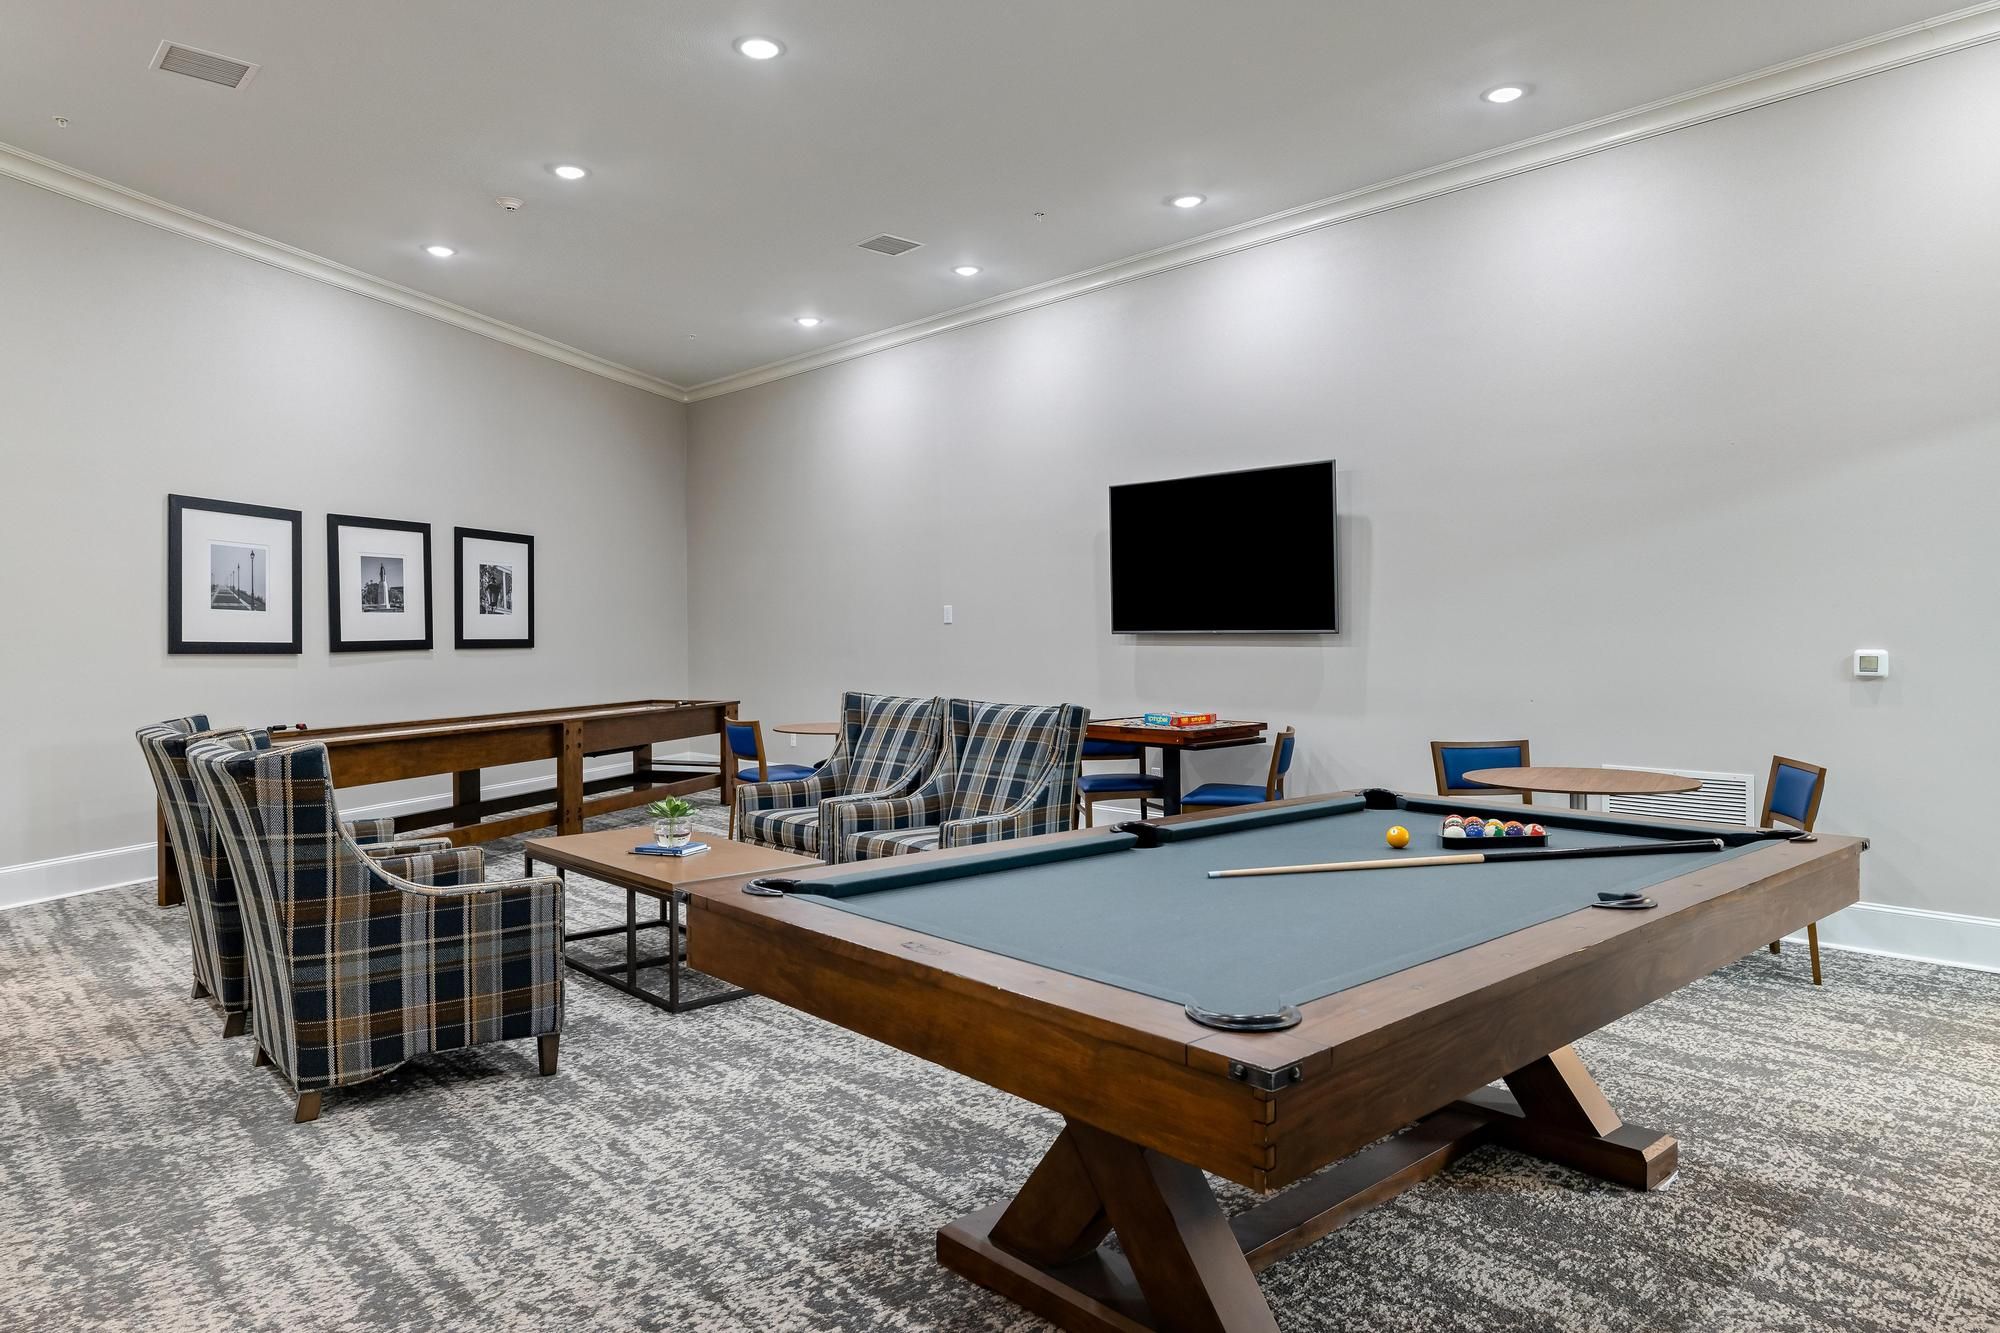 The Claiborne at Baton Rouge senior community game room with pool table